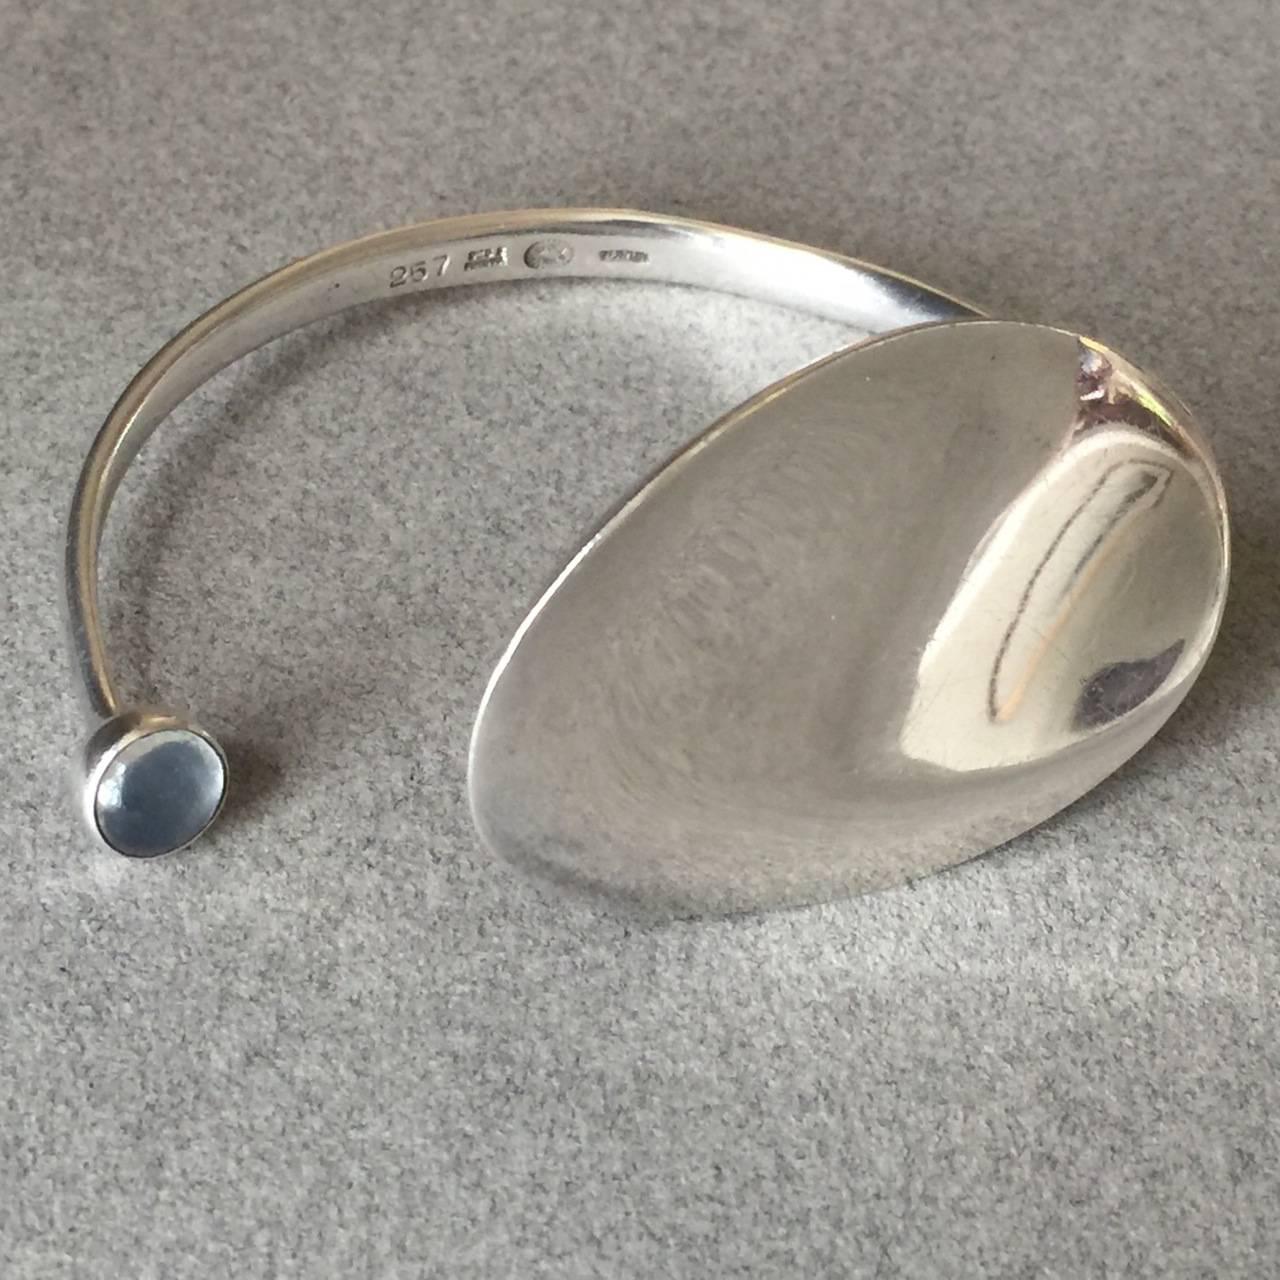 Georg Jensen Sterling Silver Cuff with Moonstone No. 257 by Vivianna Torun.

Sleek, modernist cuff characteristic of Torun's designs of the 1960s. Moonstone has a lovely color. This is a unique and hard to find piece.

6.75